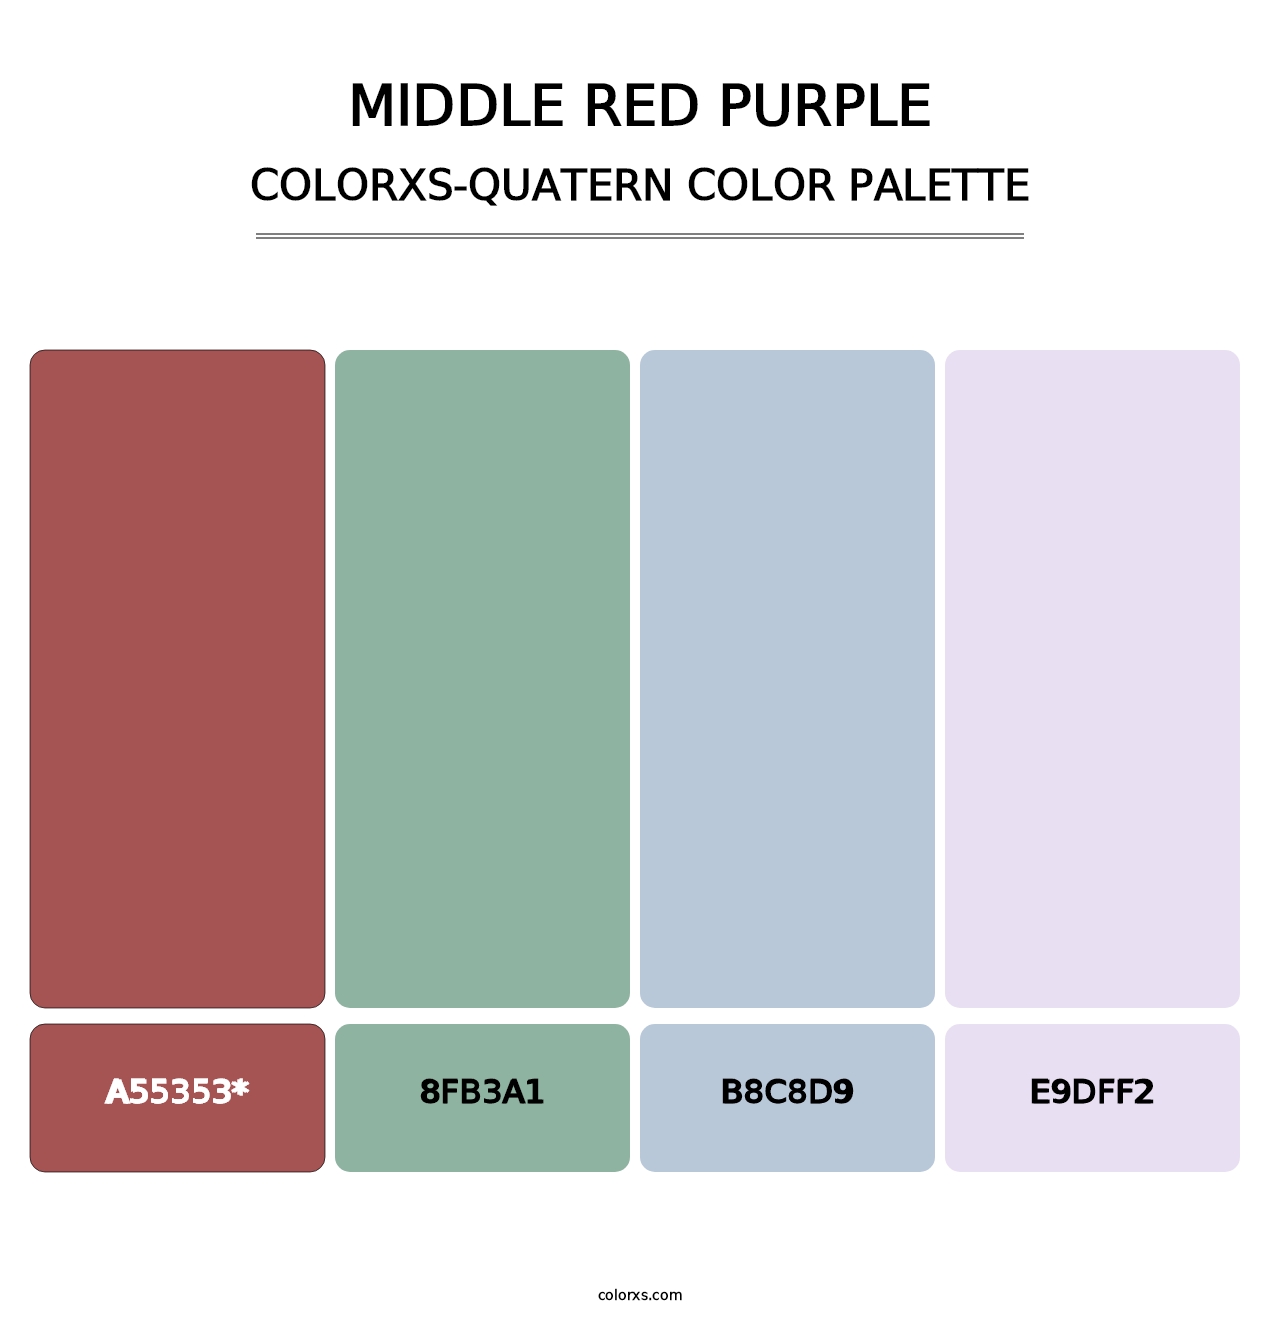 Middle Red Purple - Colorxs Quatern Palette